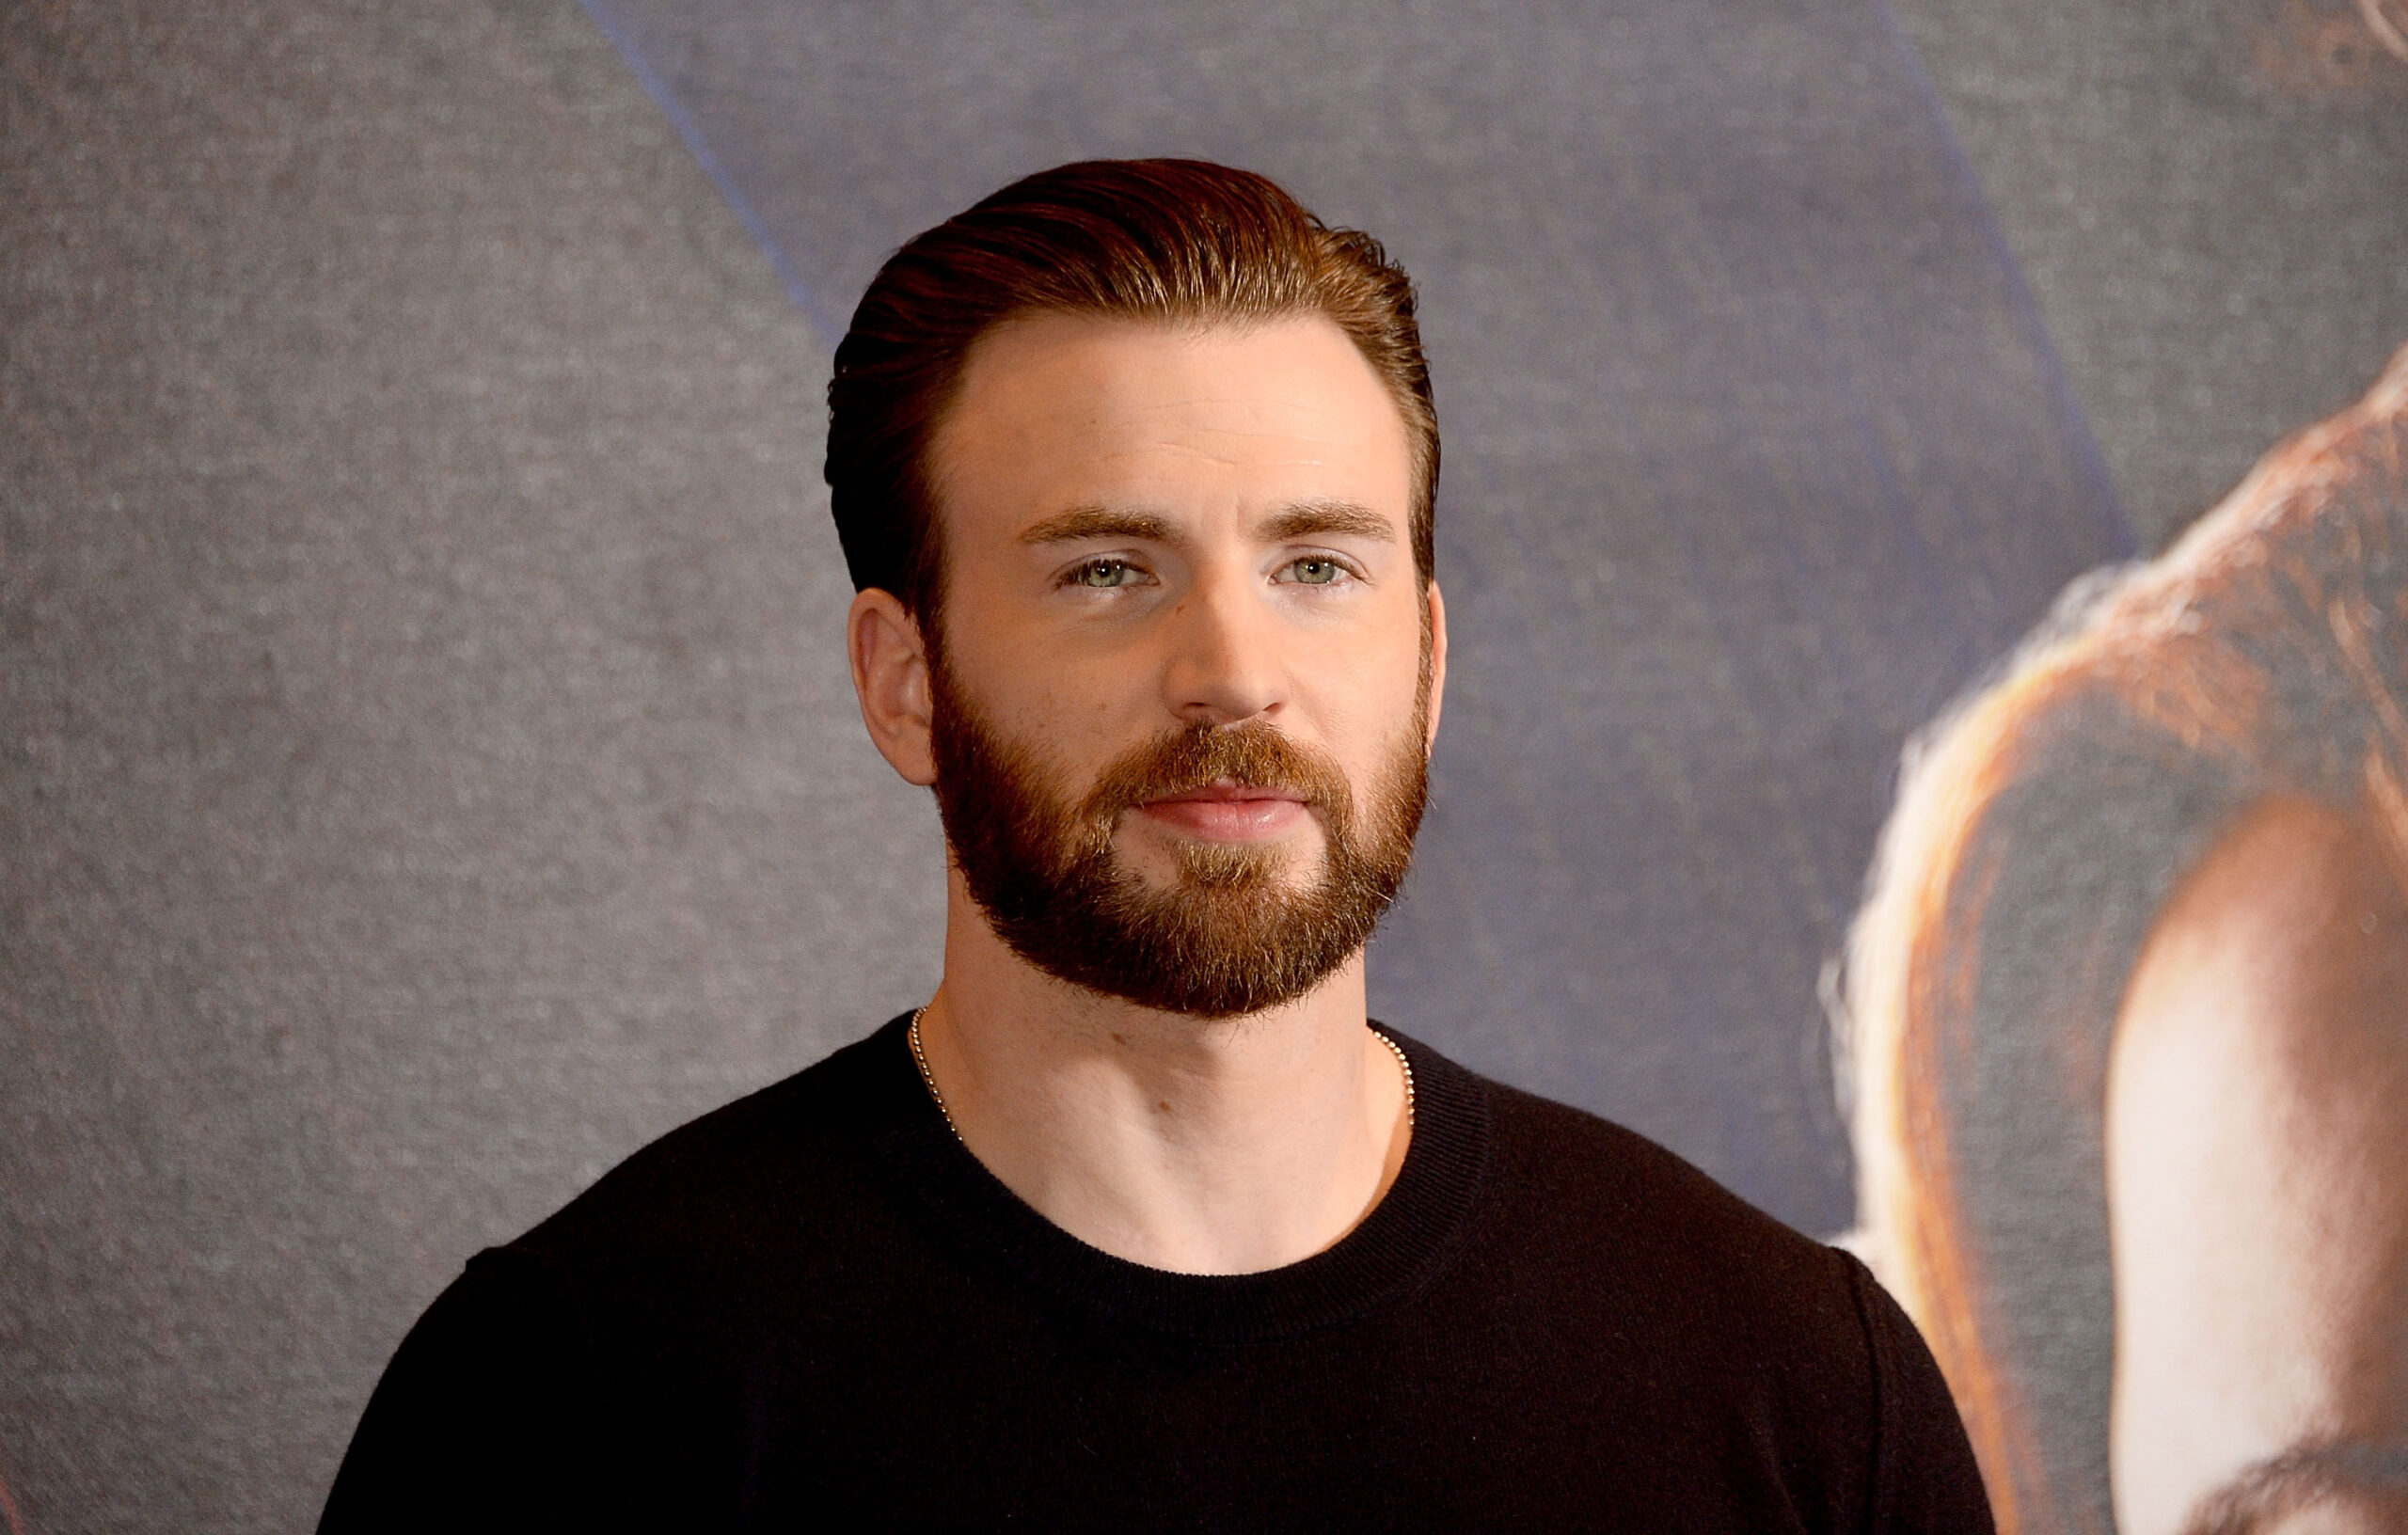 Chris Evans goes viral after accidentally sharing nude 